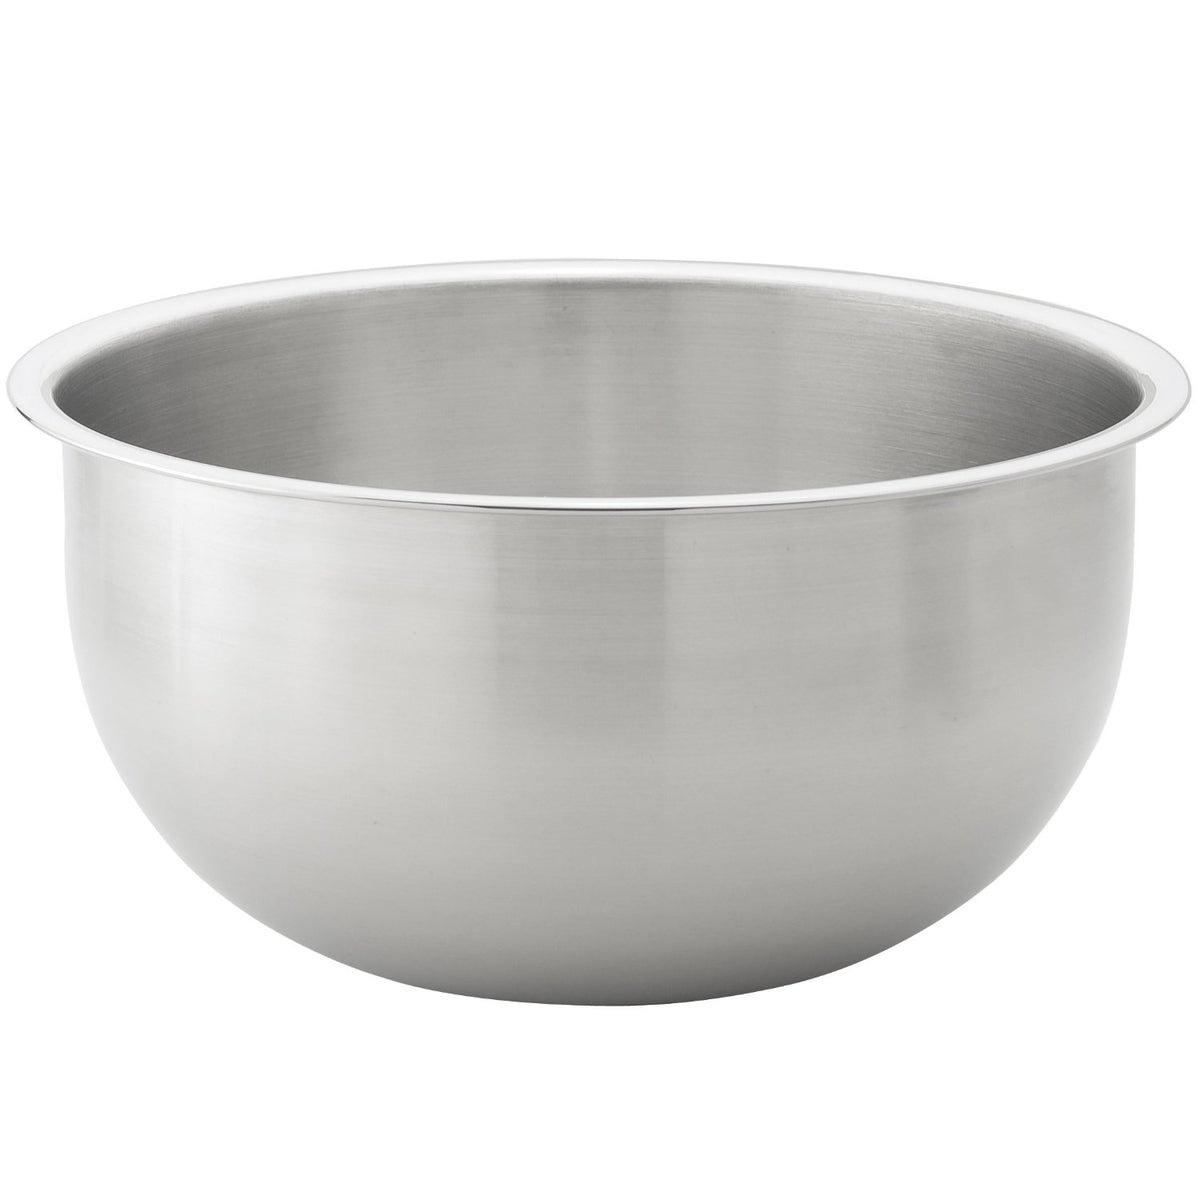 The Essentials 48004 Mixing Bowl, Stainless Steel, 12 Quarts